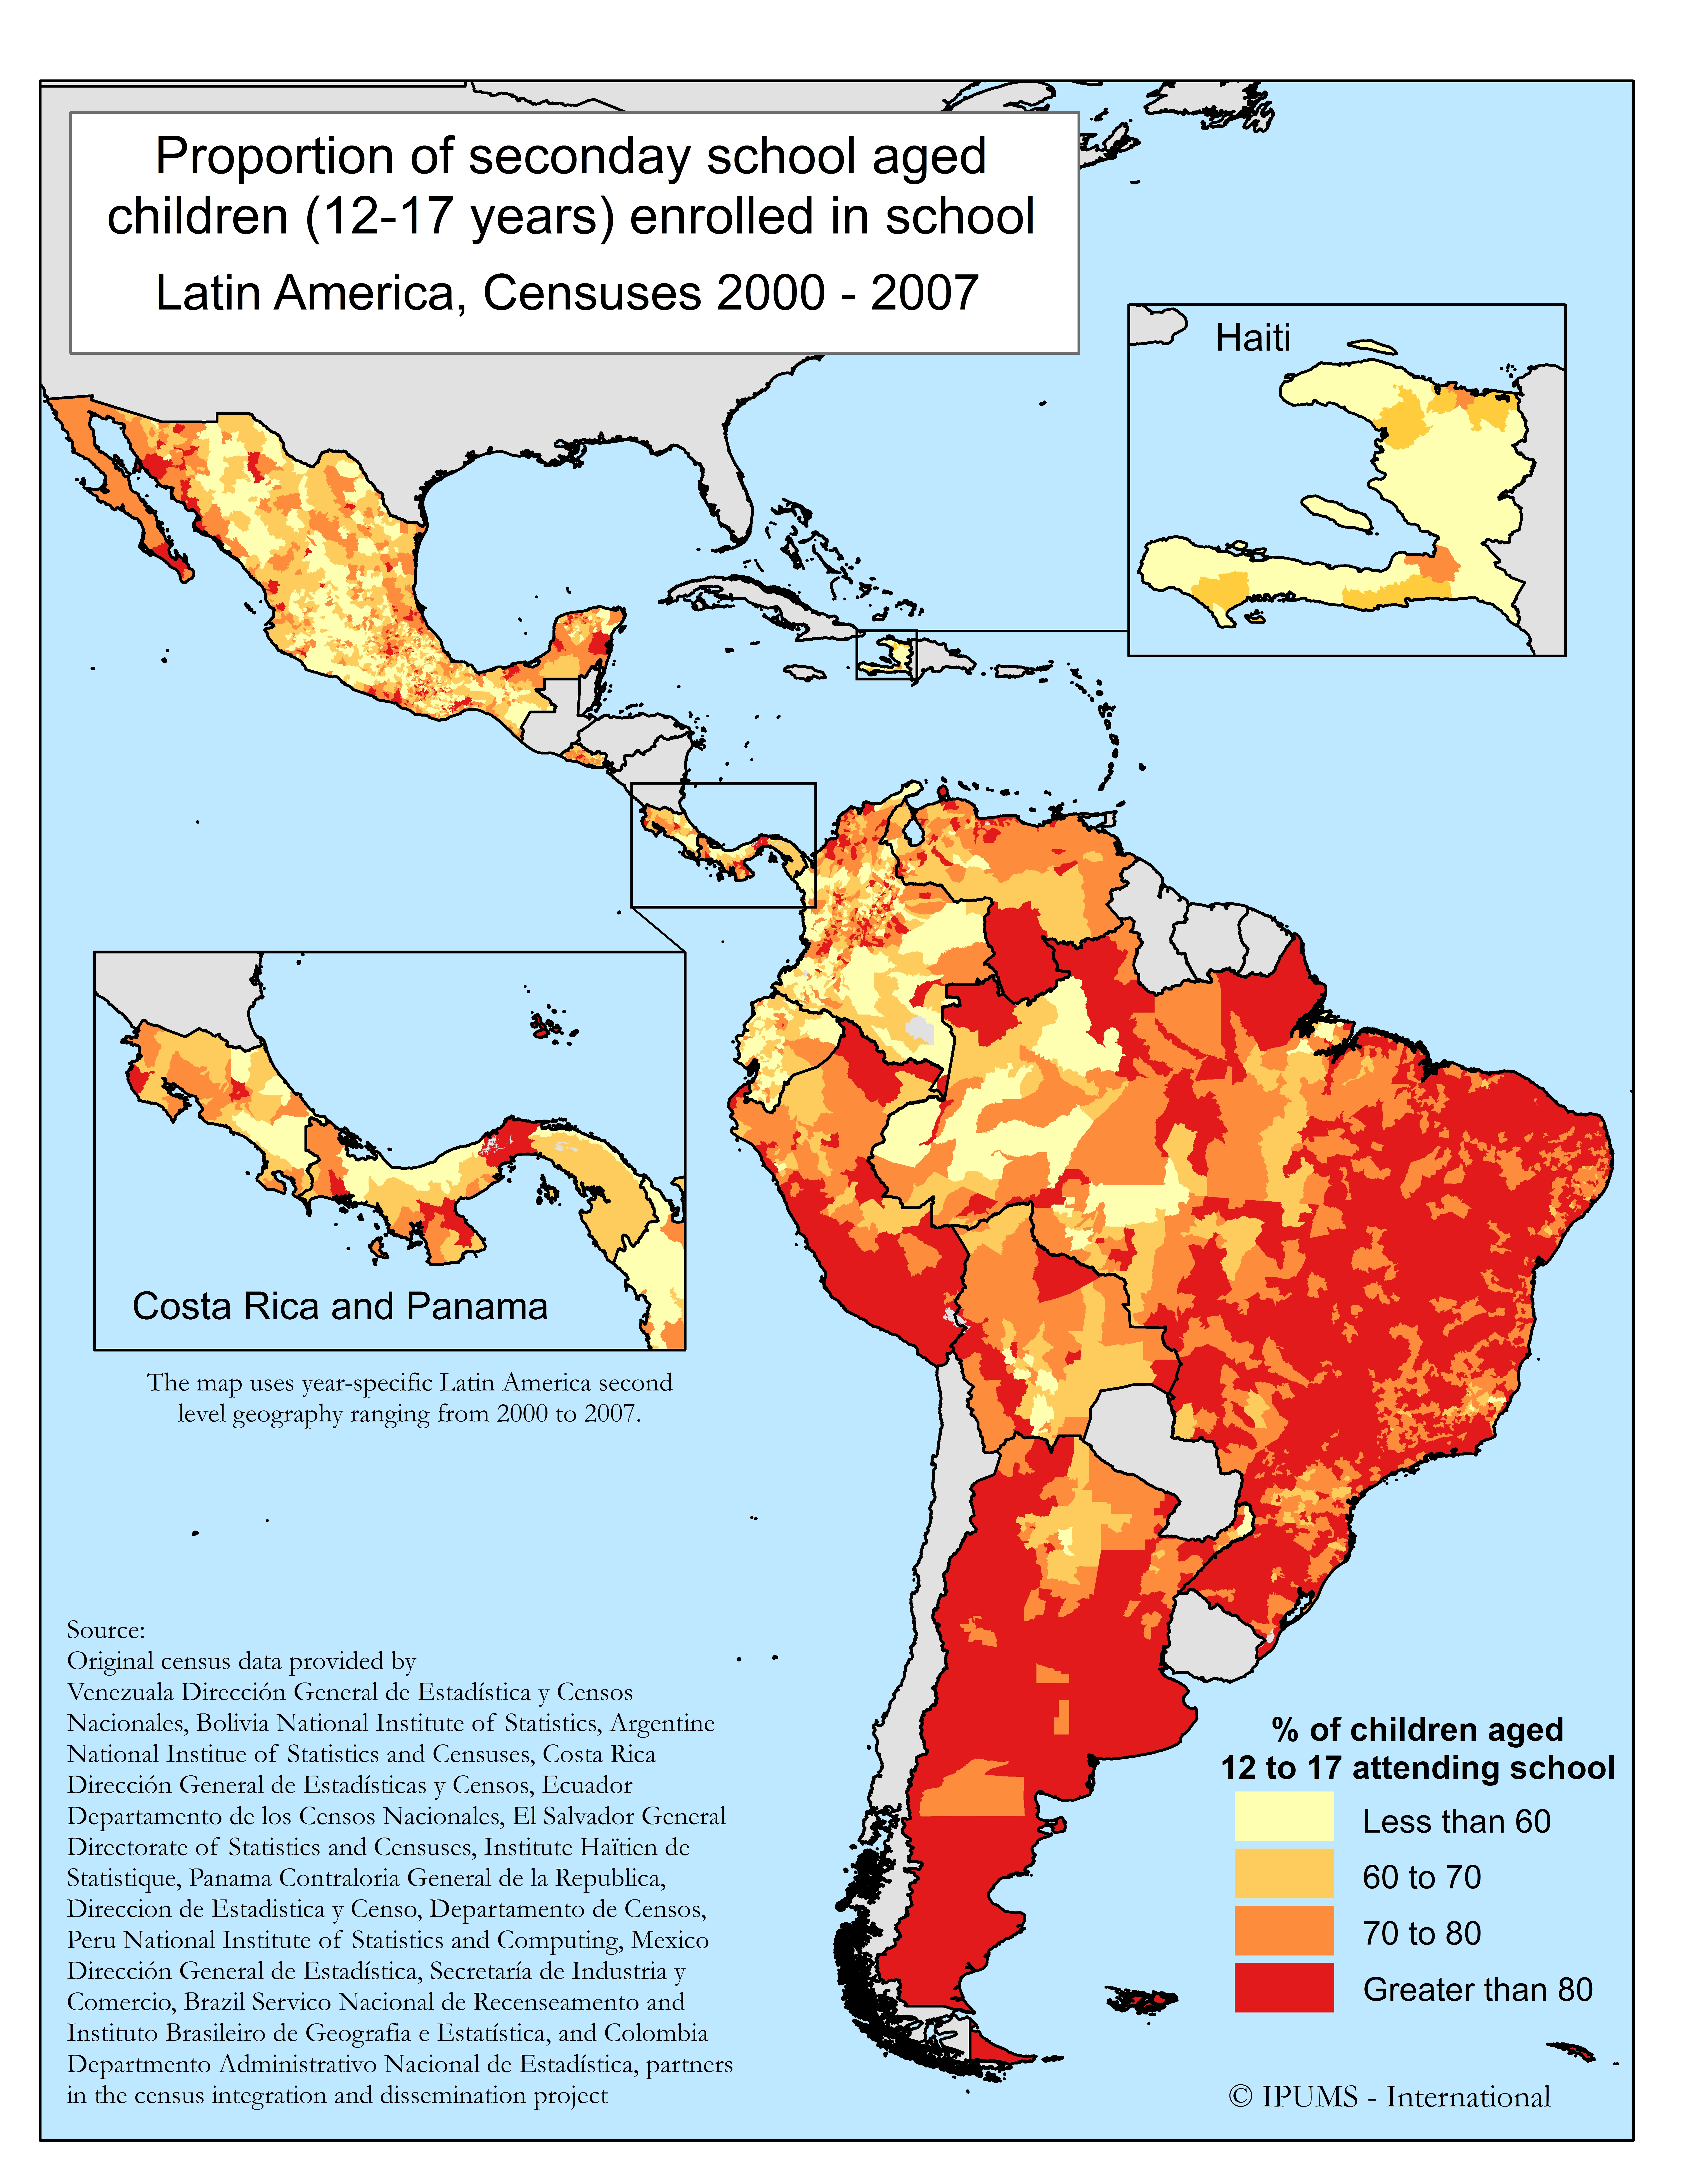 Map showing the proportion of secondary school-age children (age 12-17 years) who were currently attending school in Latin America from censuses 2000 to 2007, calculated at the second administrative level of geography